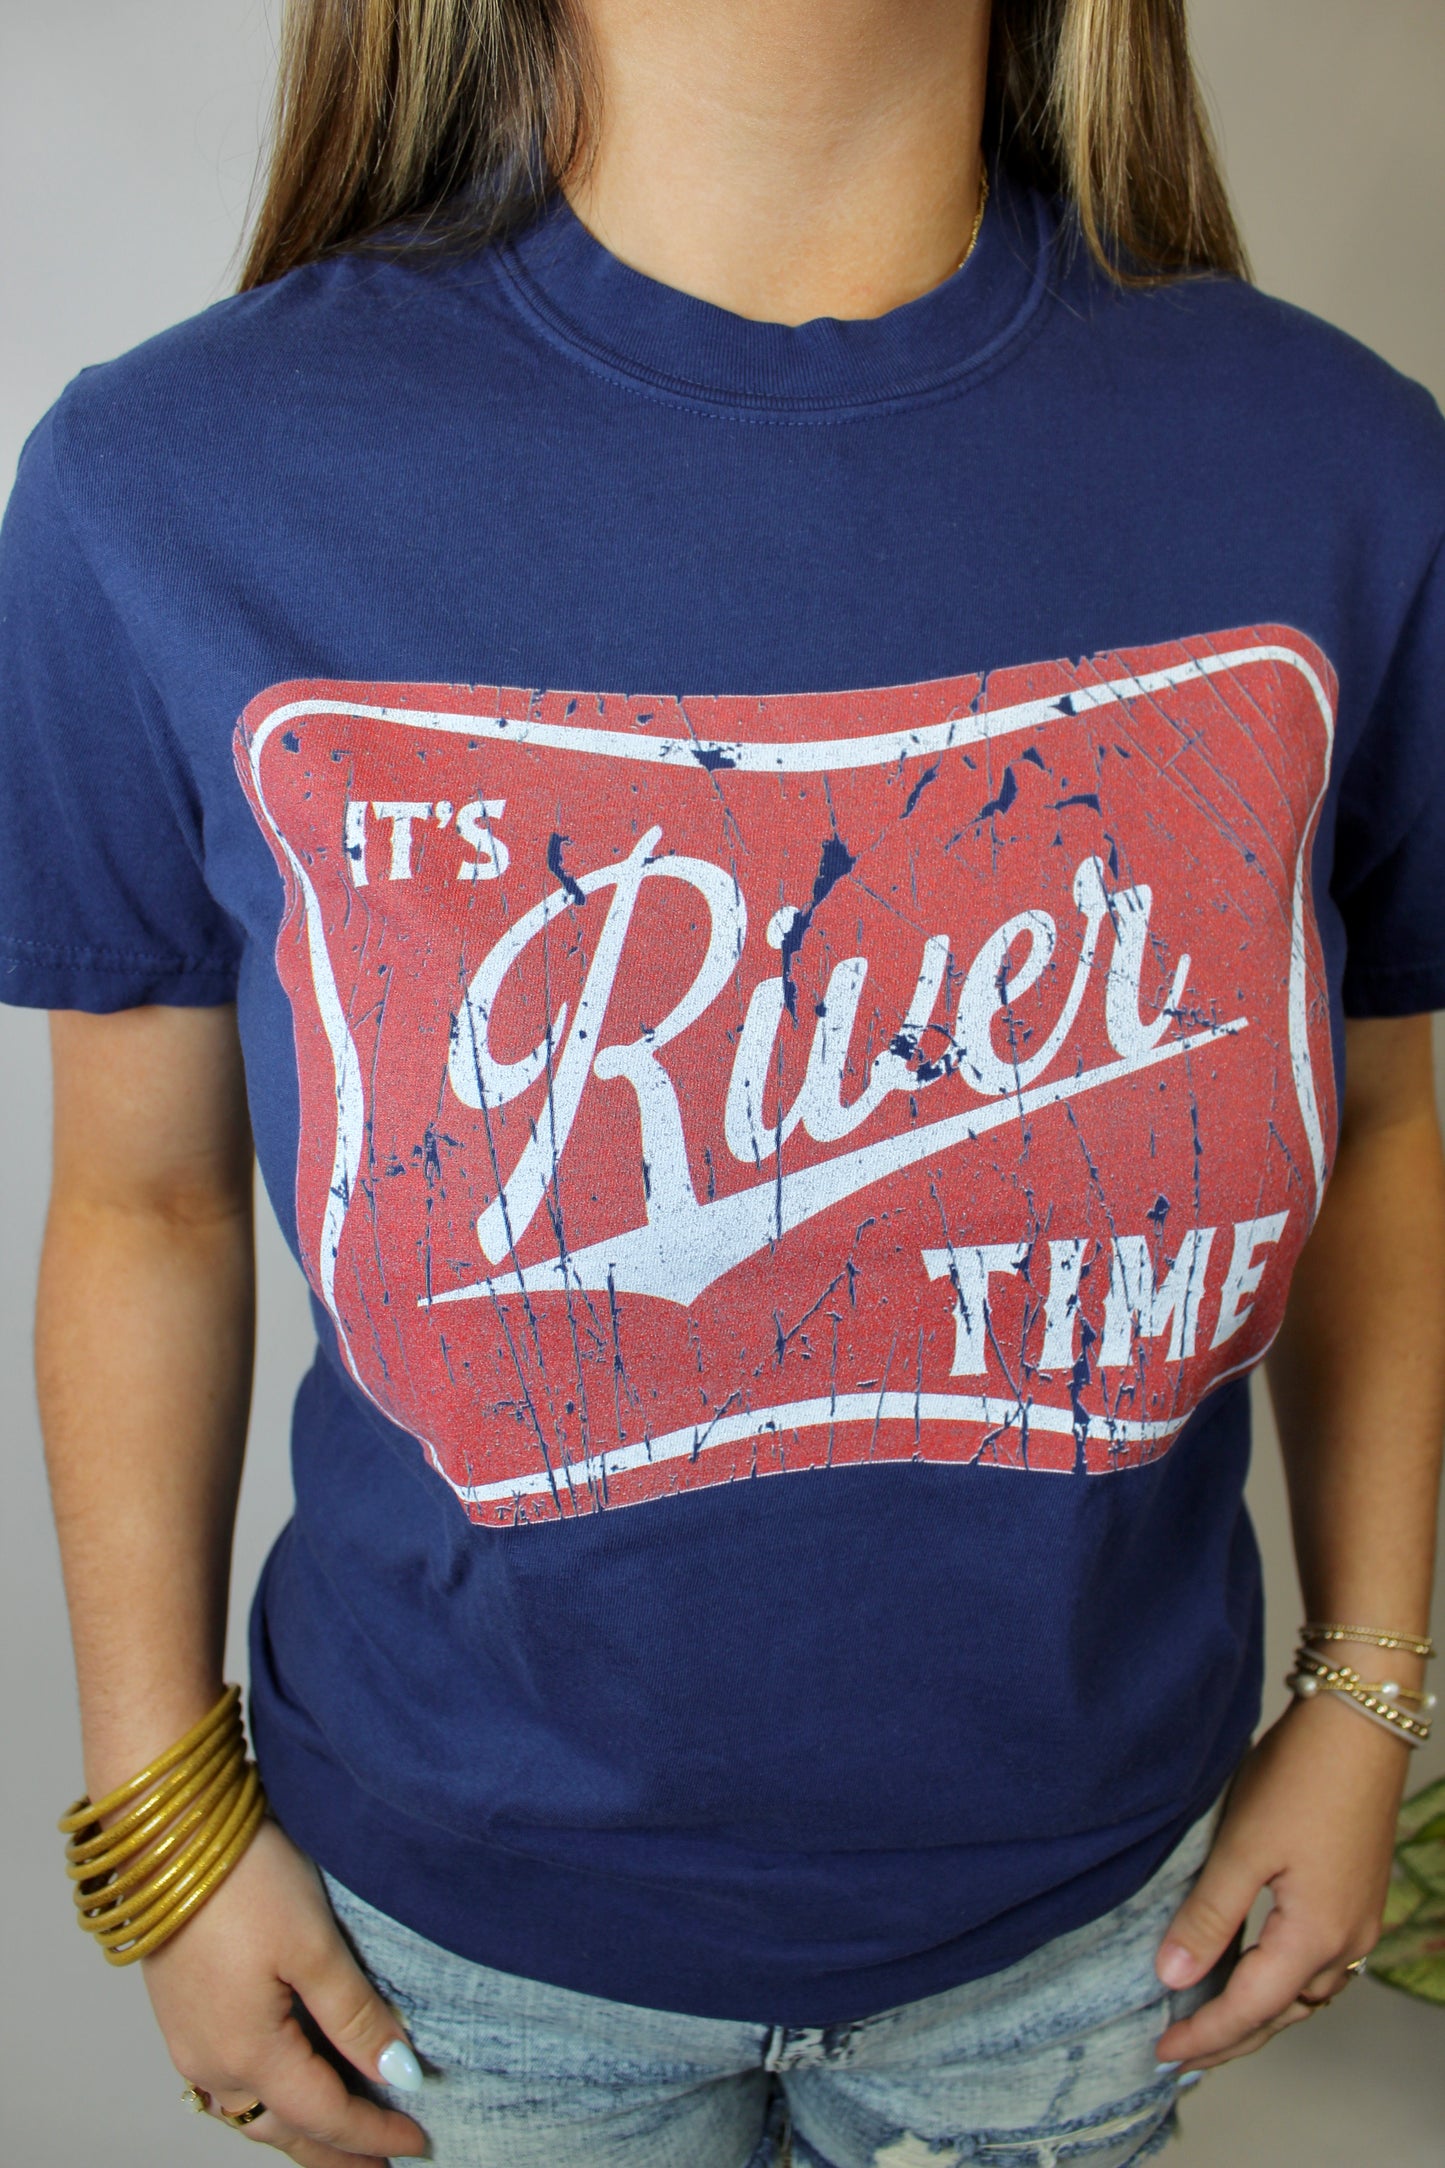 River Time Tee (S-3X)